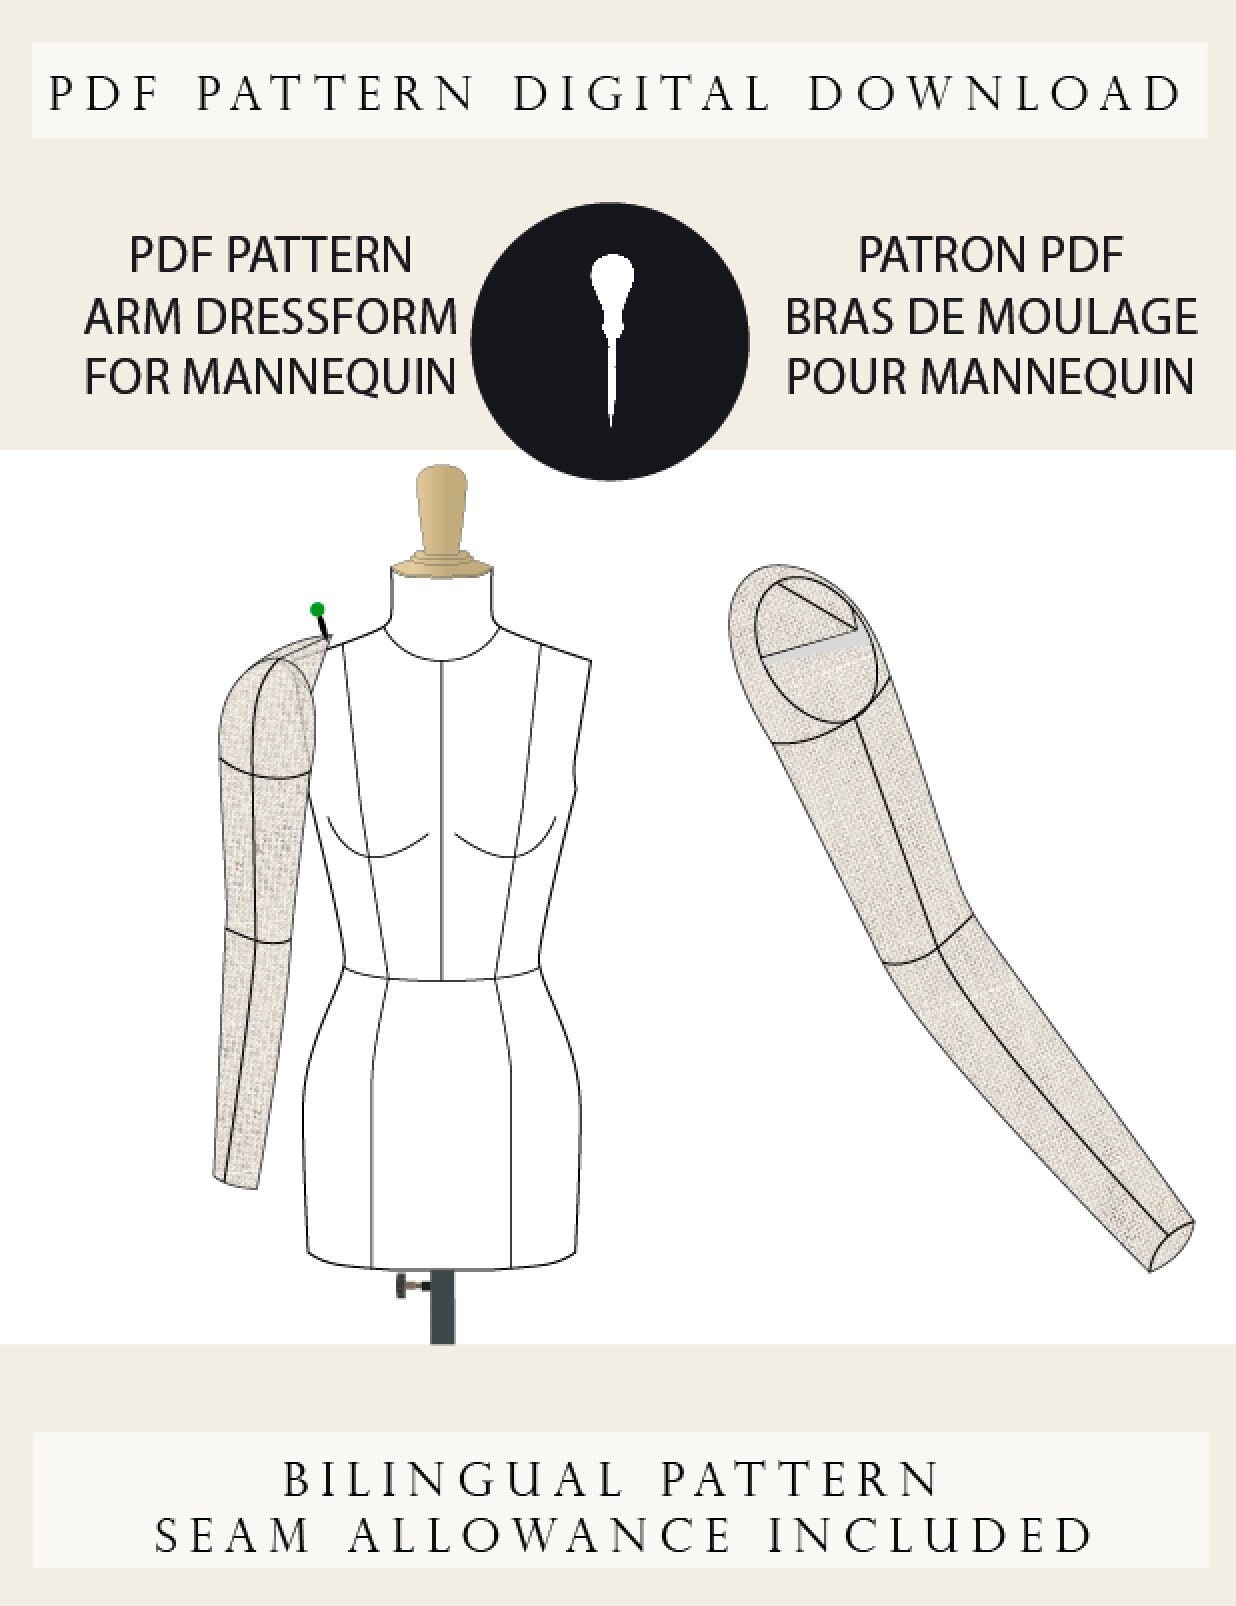 Padding Fitting System for soft tailor’s dress forms